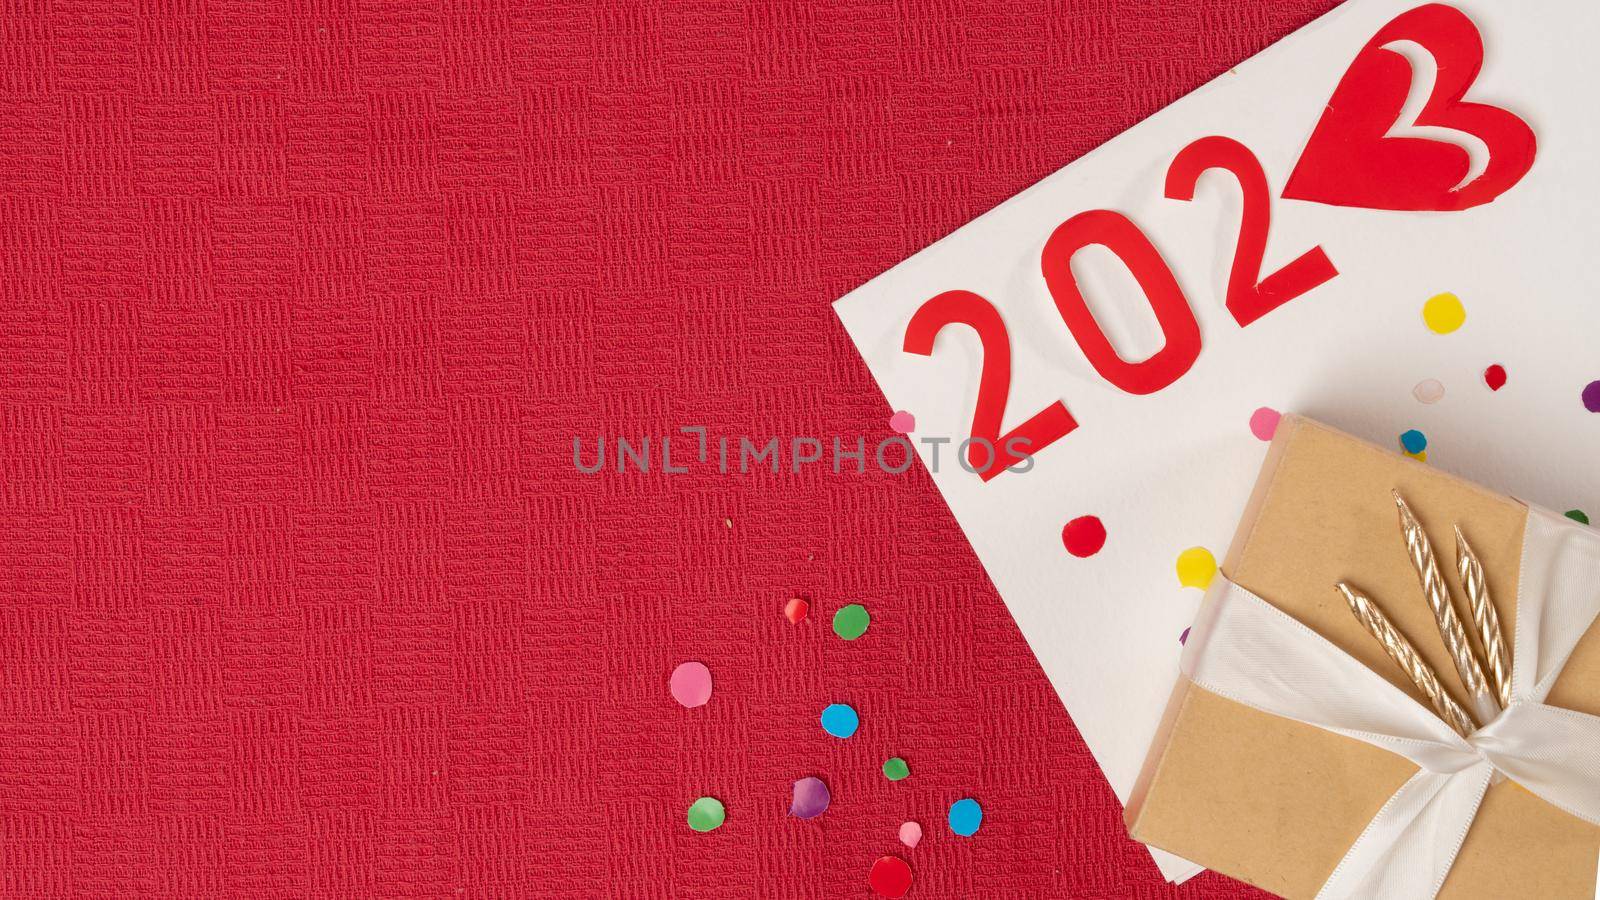 the number 2023 next to the gift box on a red background with confetti, new year by voktybre